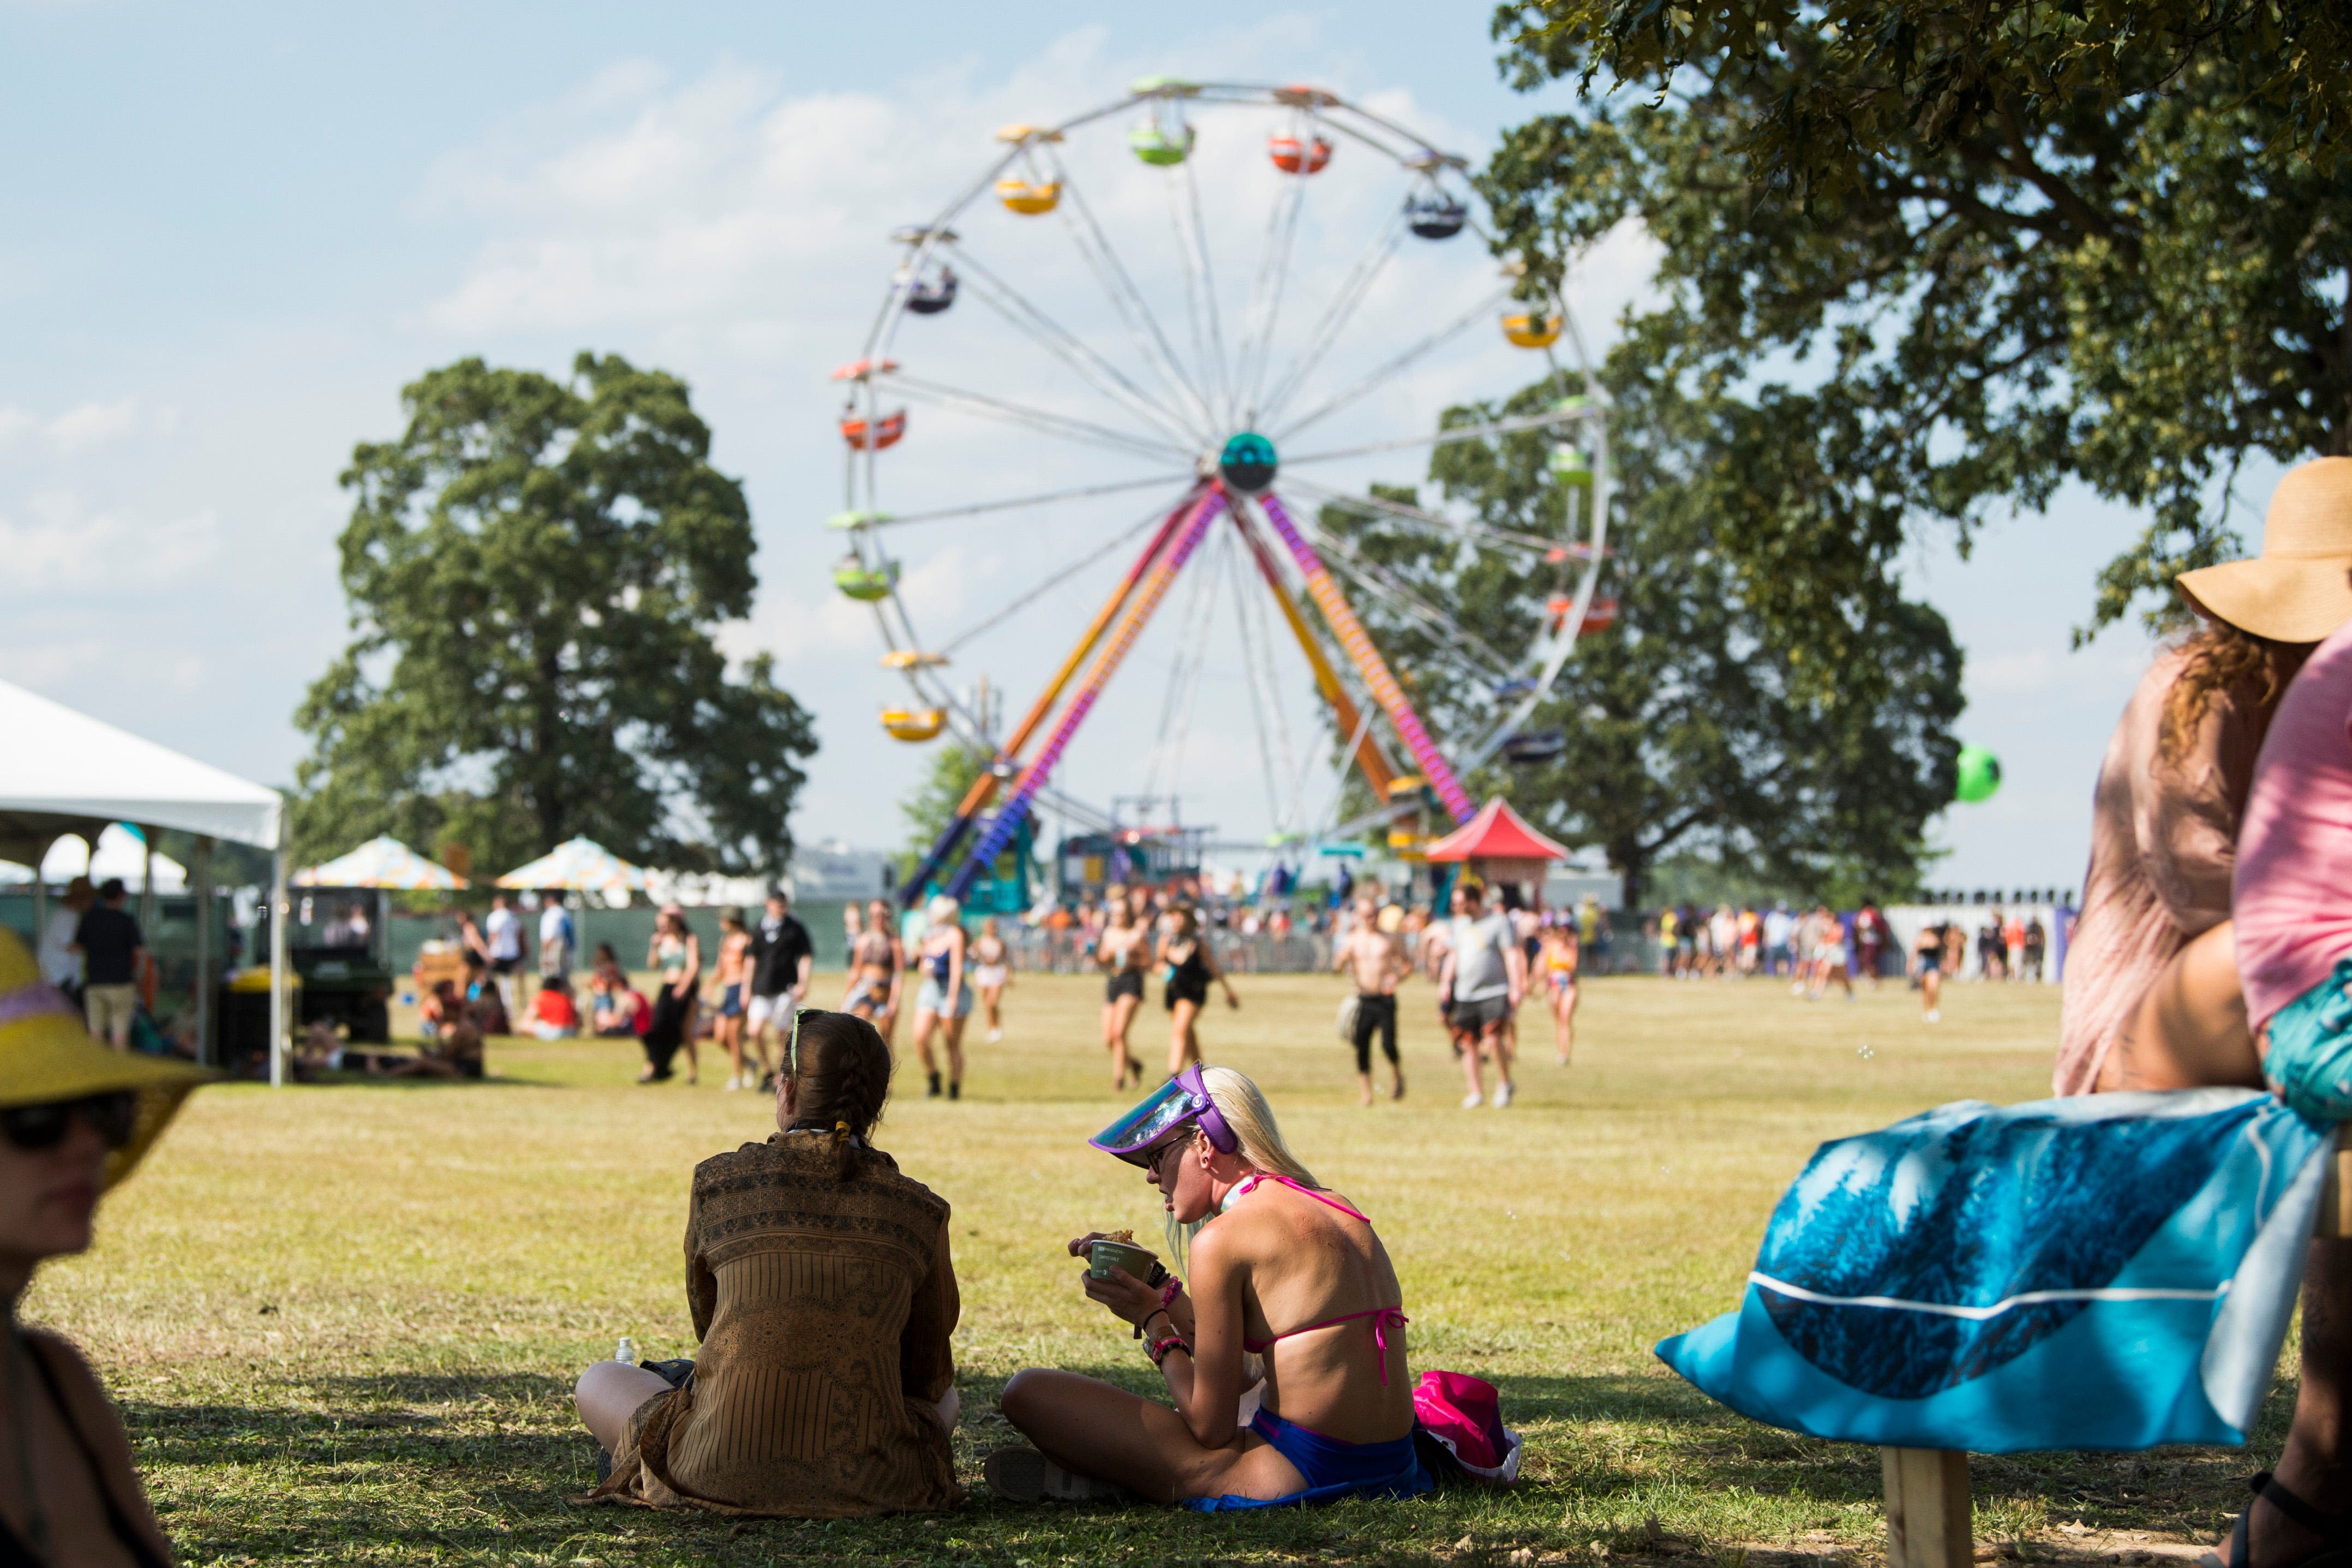 10 music festivals near Ohio you can drive to this summer, including Lollapalooza, Bonnaroo